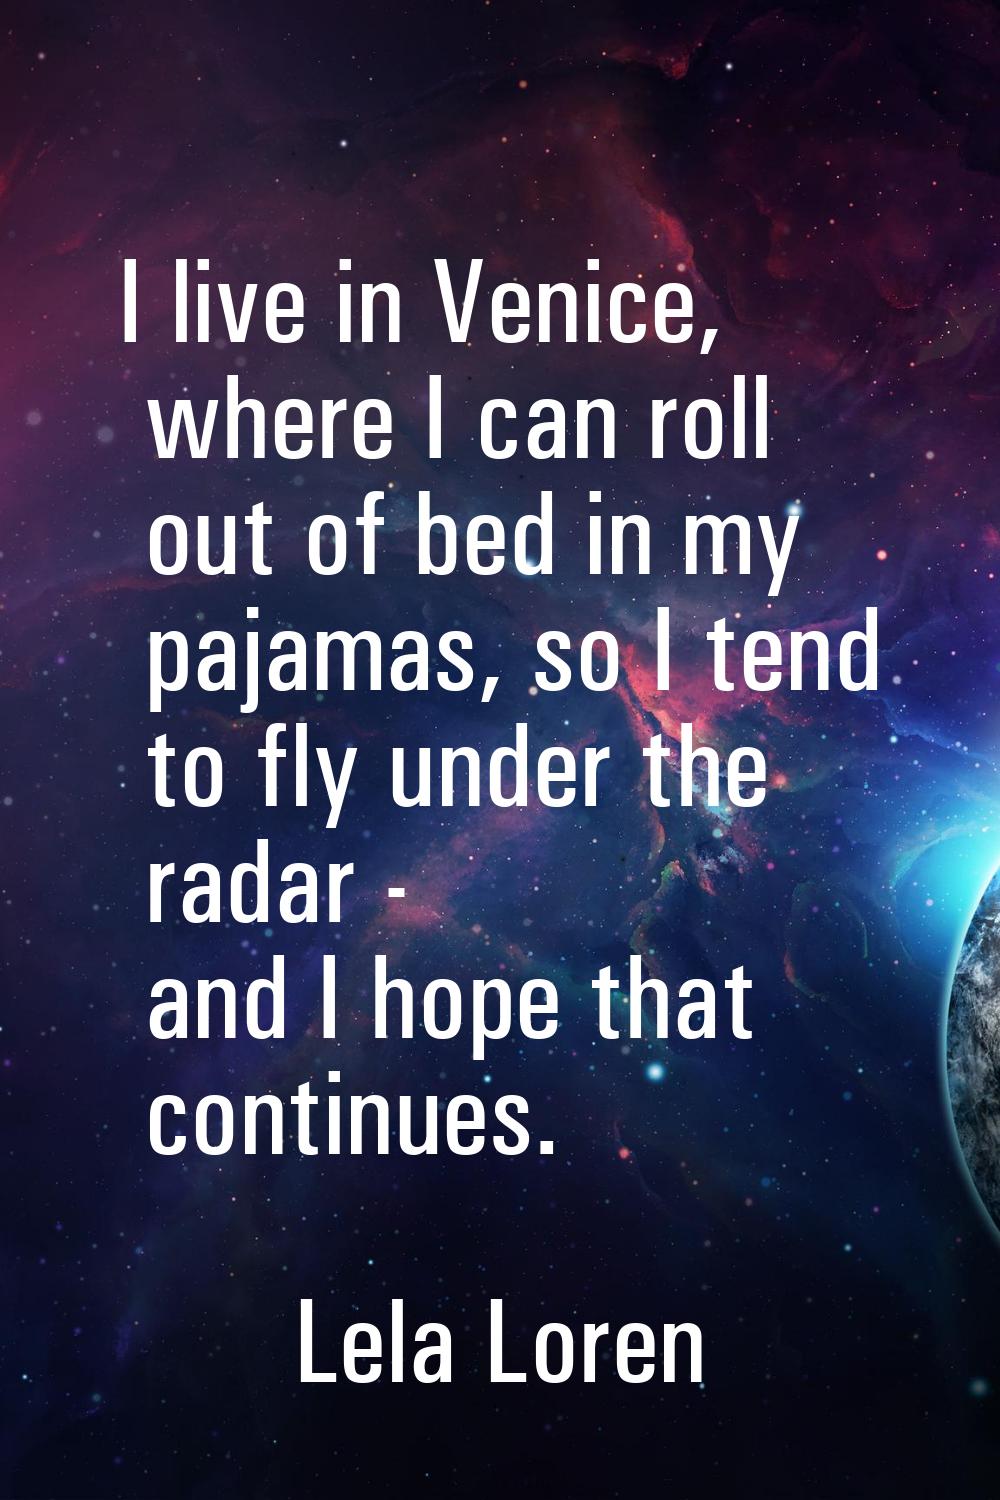 I live in Venice, where I can roll out of bed in my pajamas, so I tend to fly under the radar - and